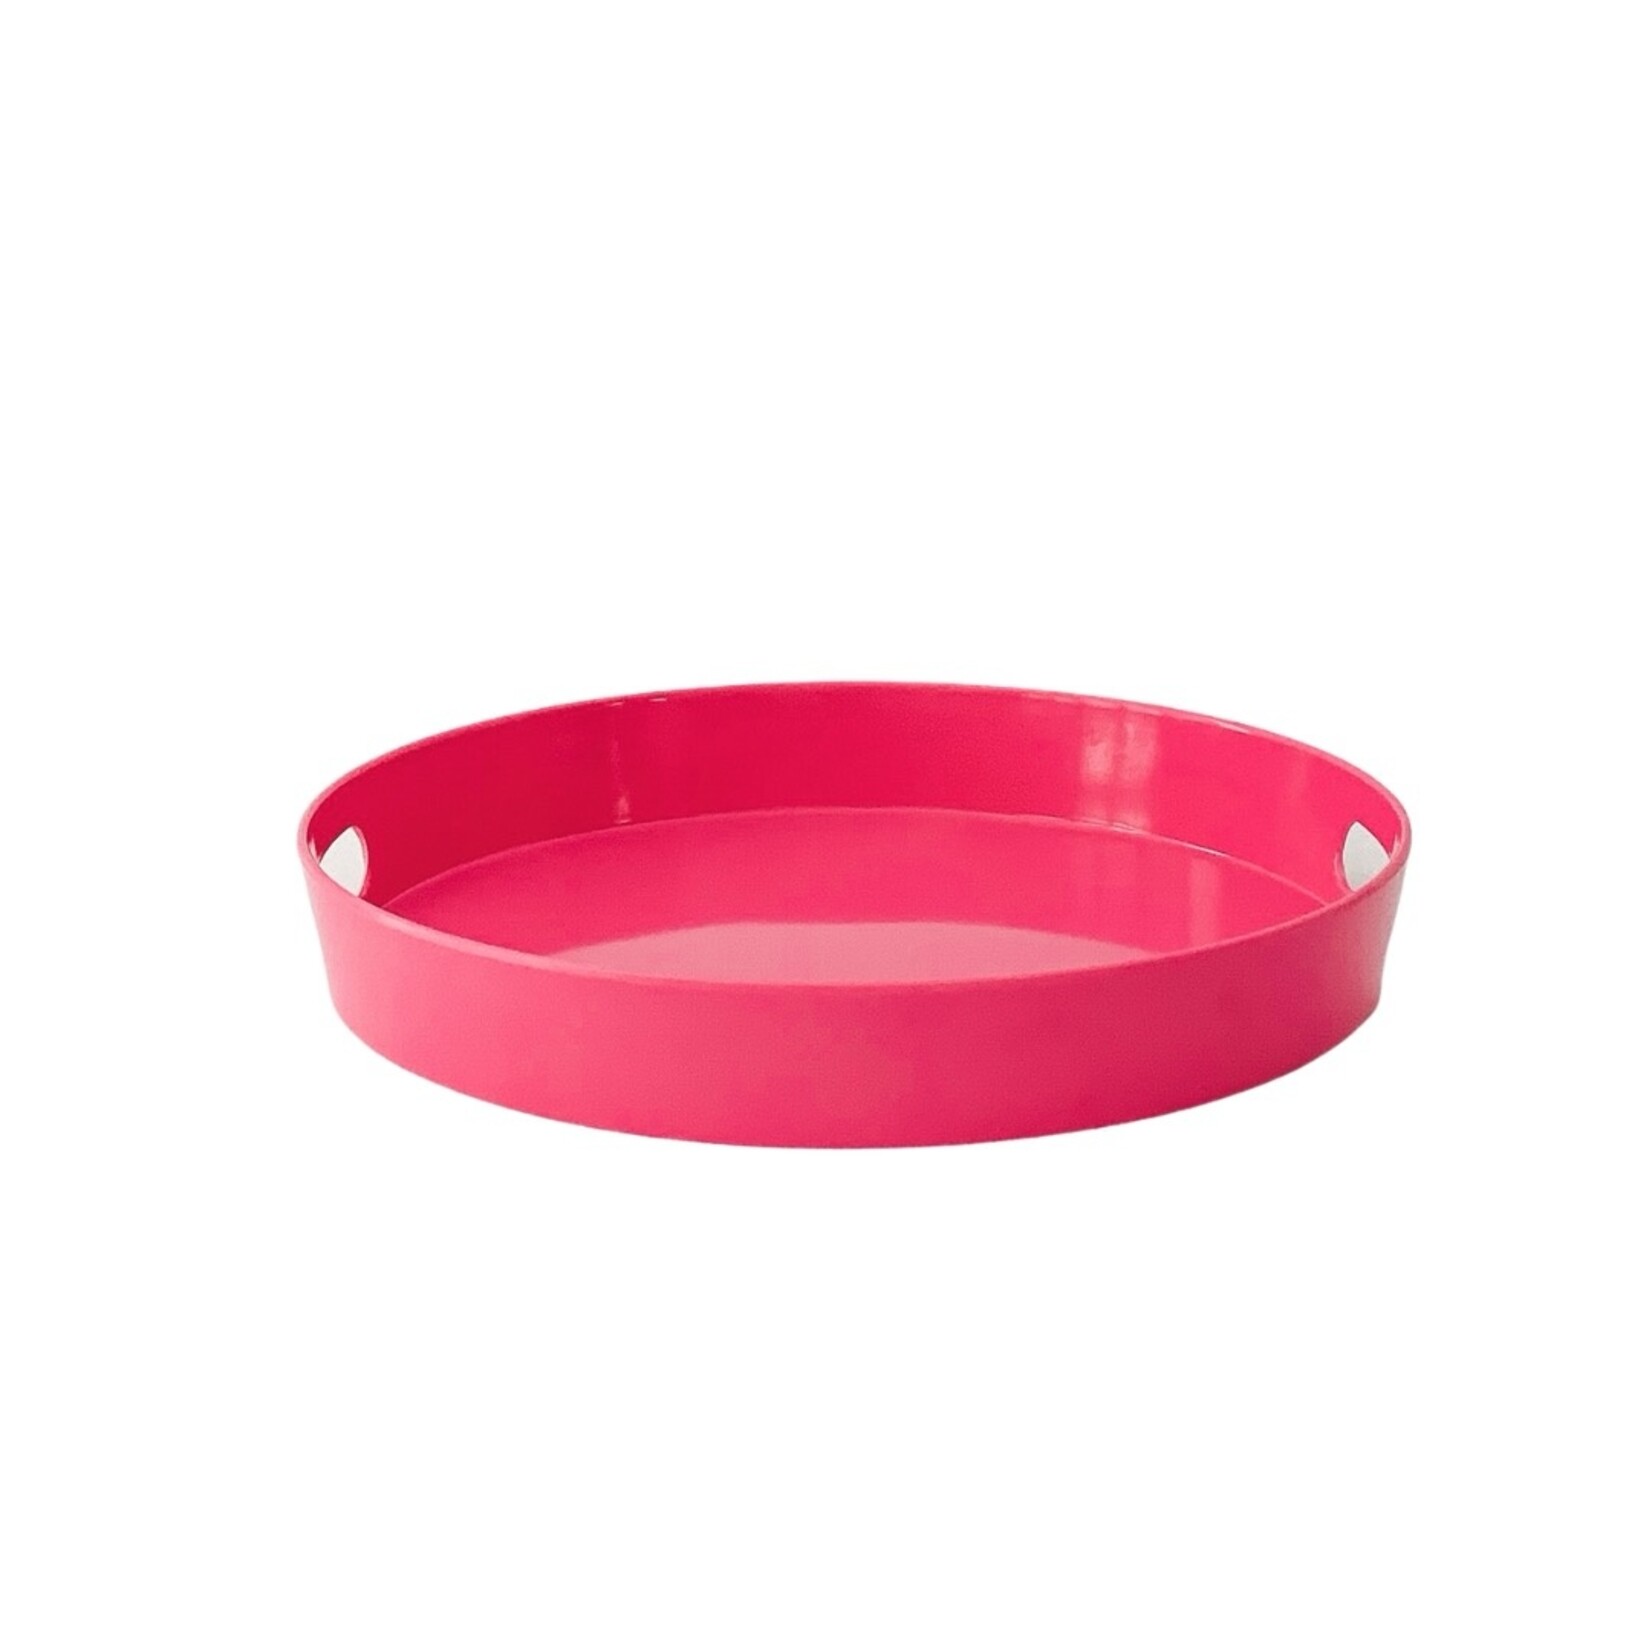 Faire/Sprinkles and Confetti Party Supplies Hot Pink Decorative Serving Tray